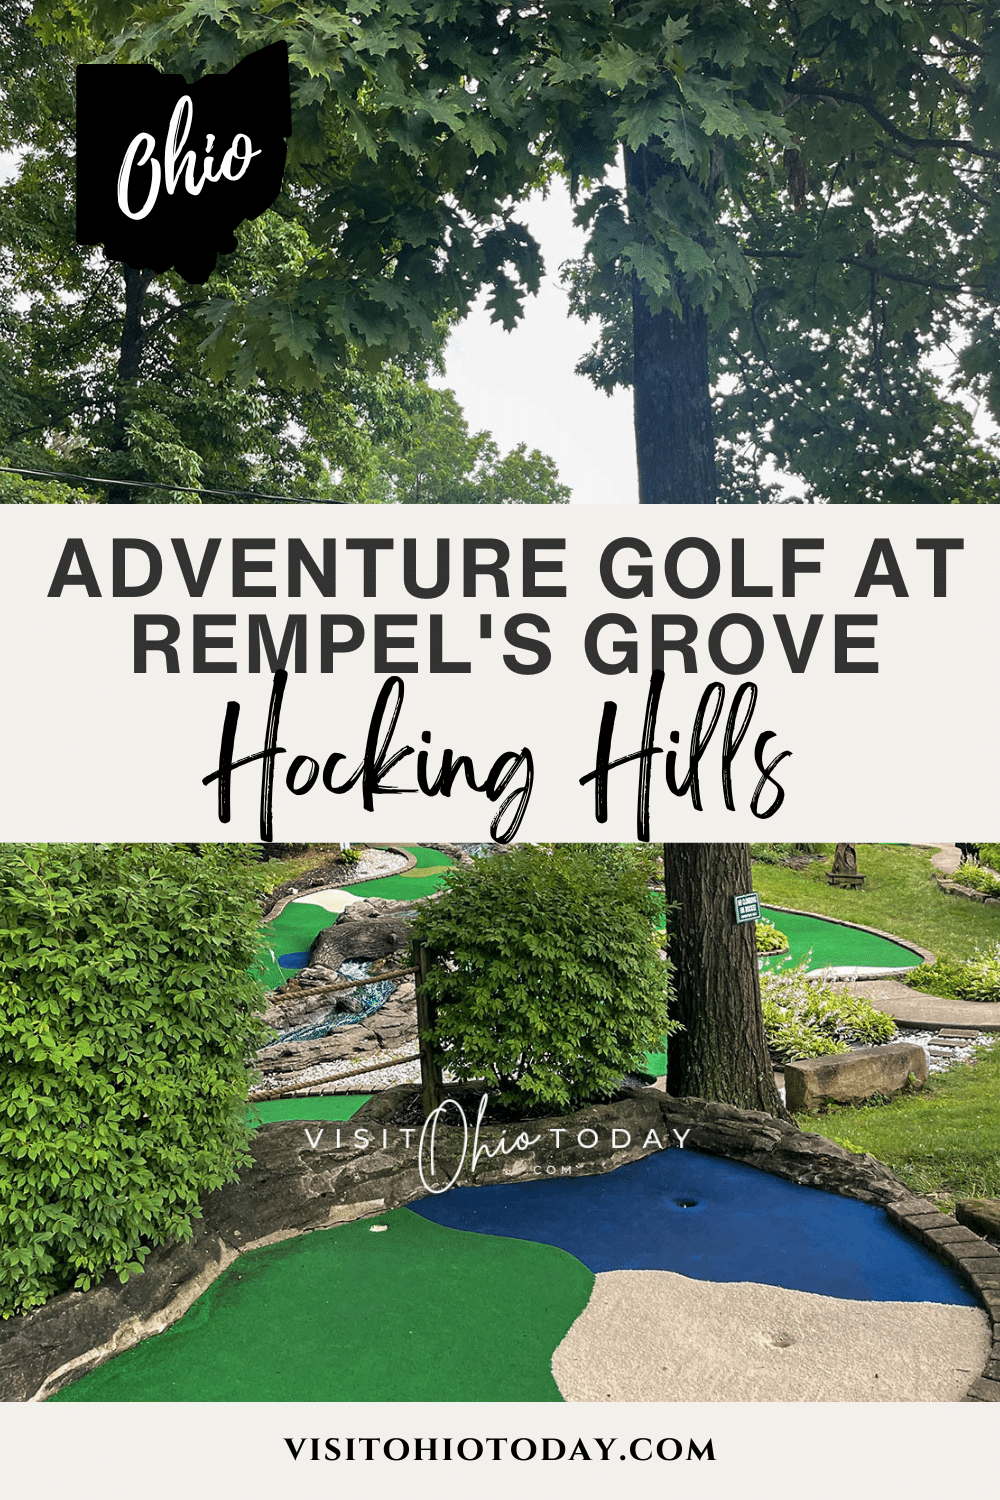 Adventure Golf at Rempel’s Grove is in beautiful Hocking Hills. Surrounded by amazing scenery and a host of other places to visit in the area.